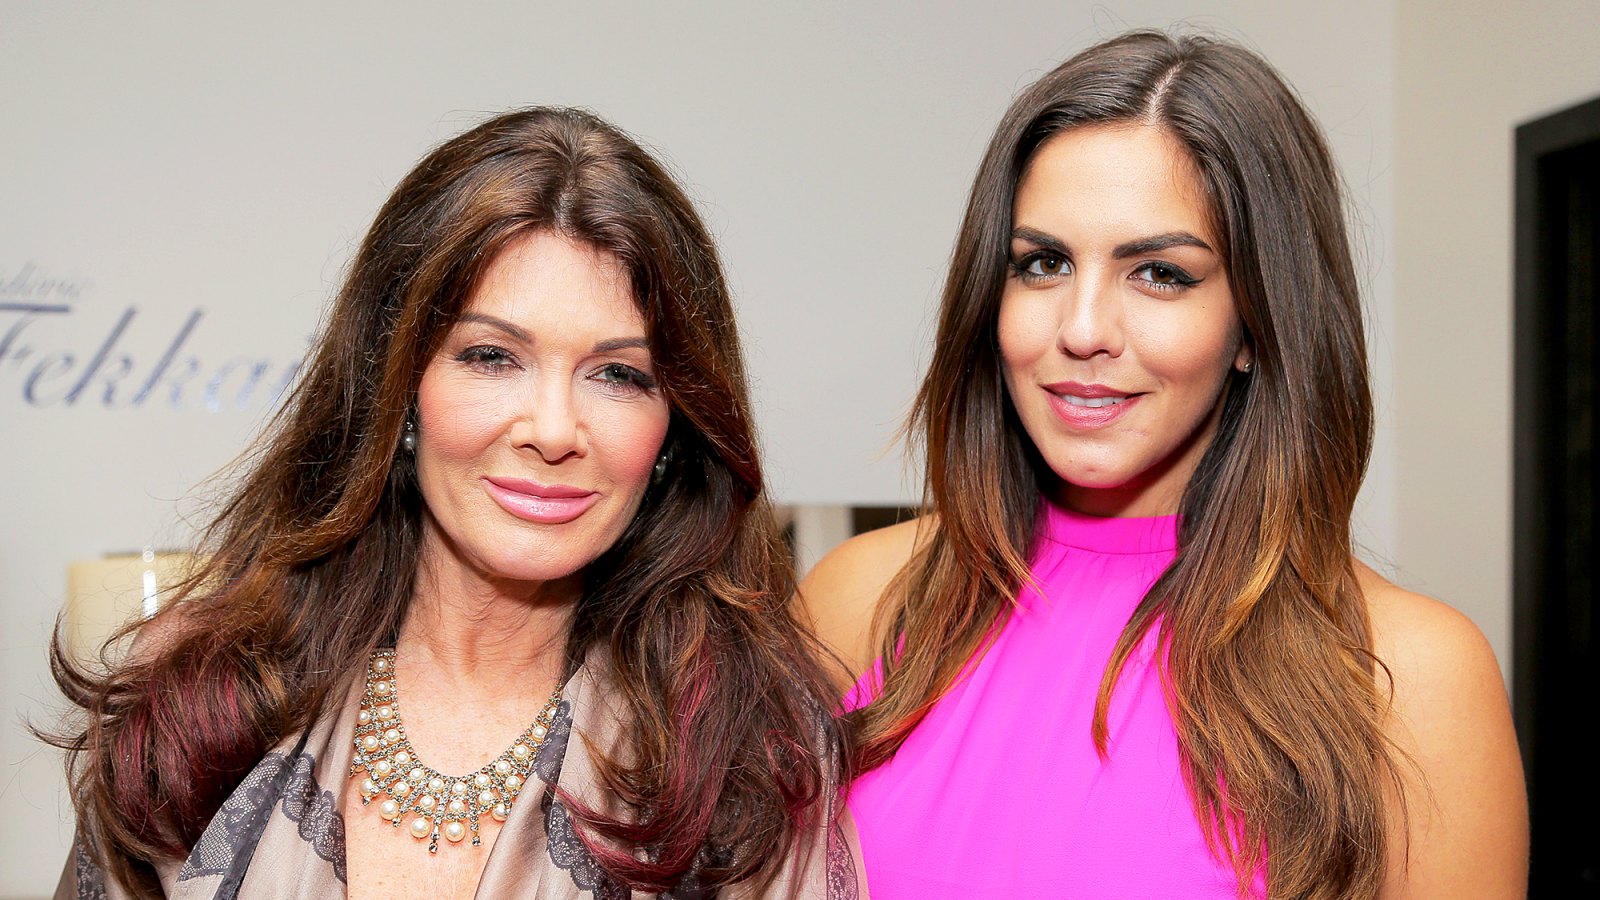 Lisa Vanderpump and Katie Maloney attend Katie Maloney's Pucker and Pout 2015 launch party at Frederic Fekkai Hair Salon in Beverly Hills, California.